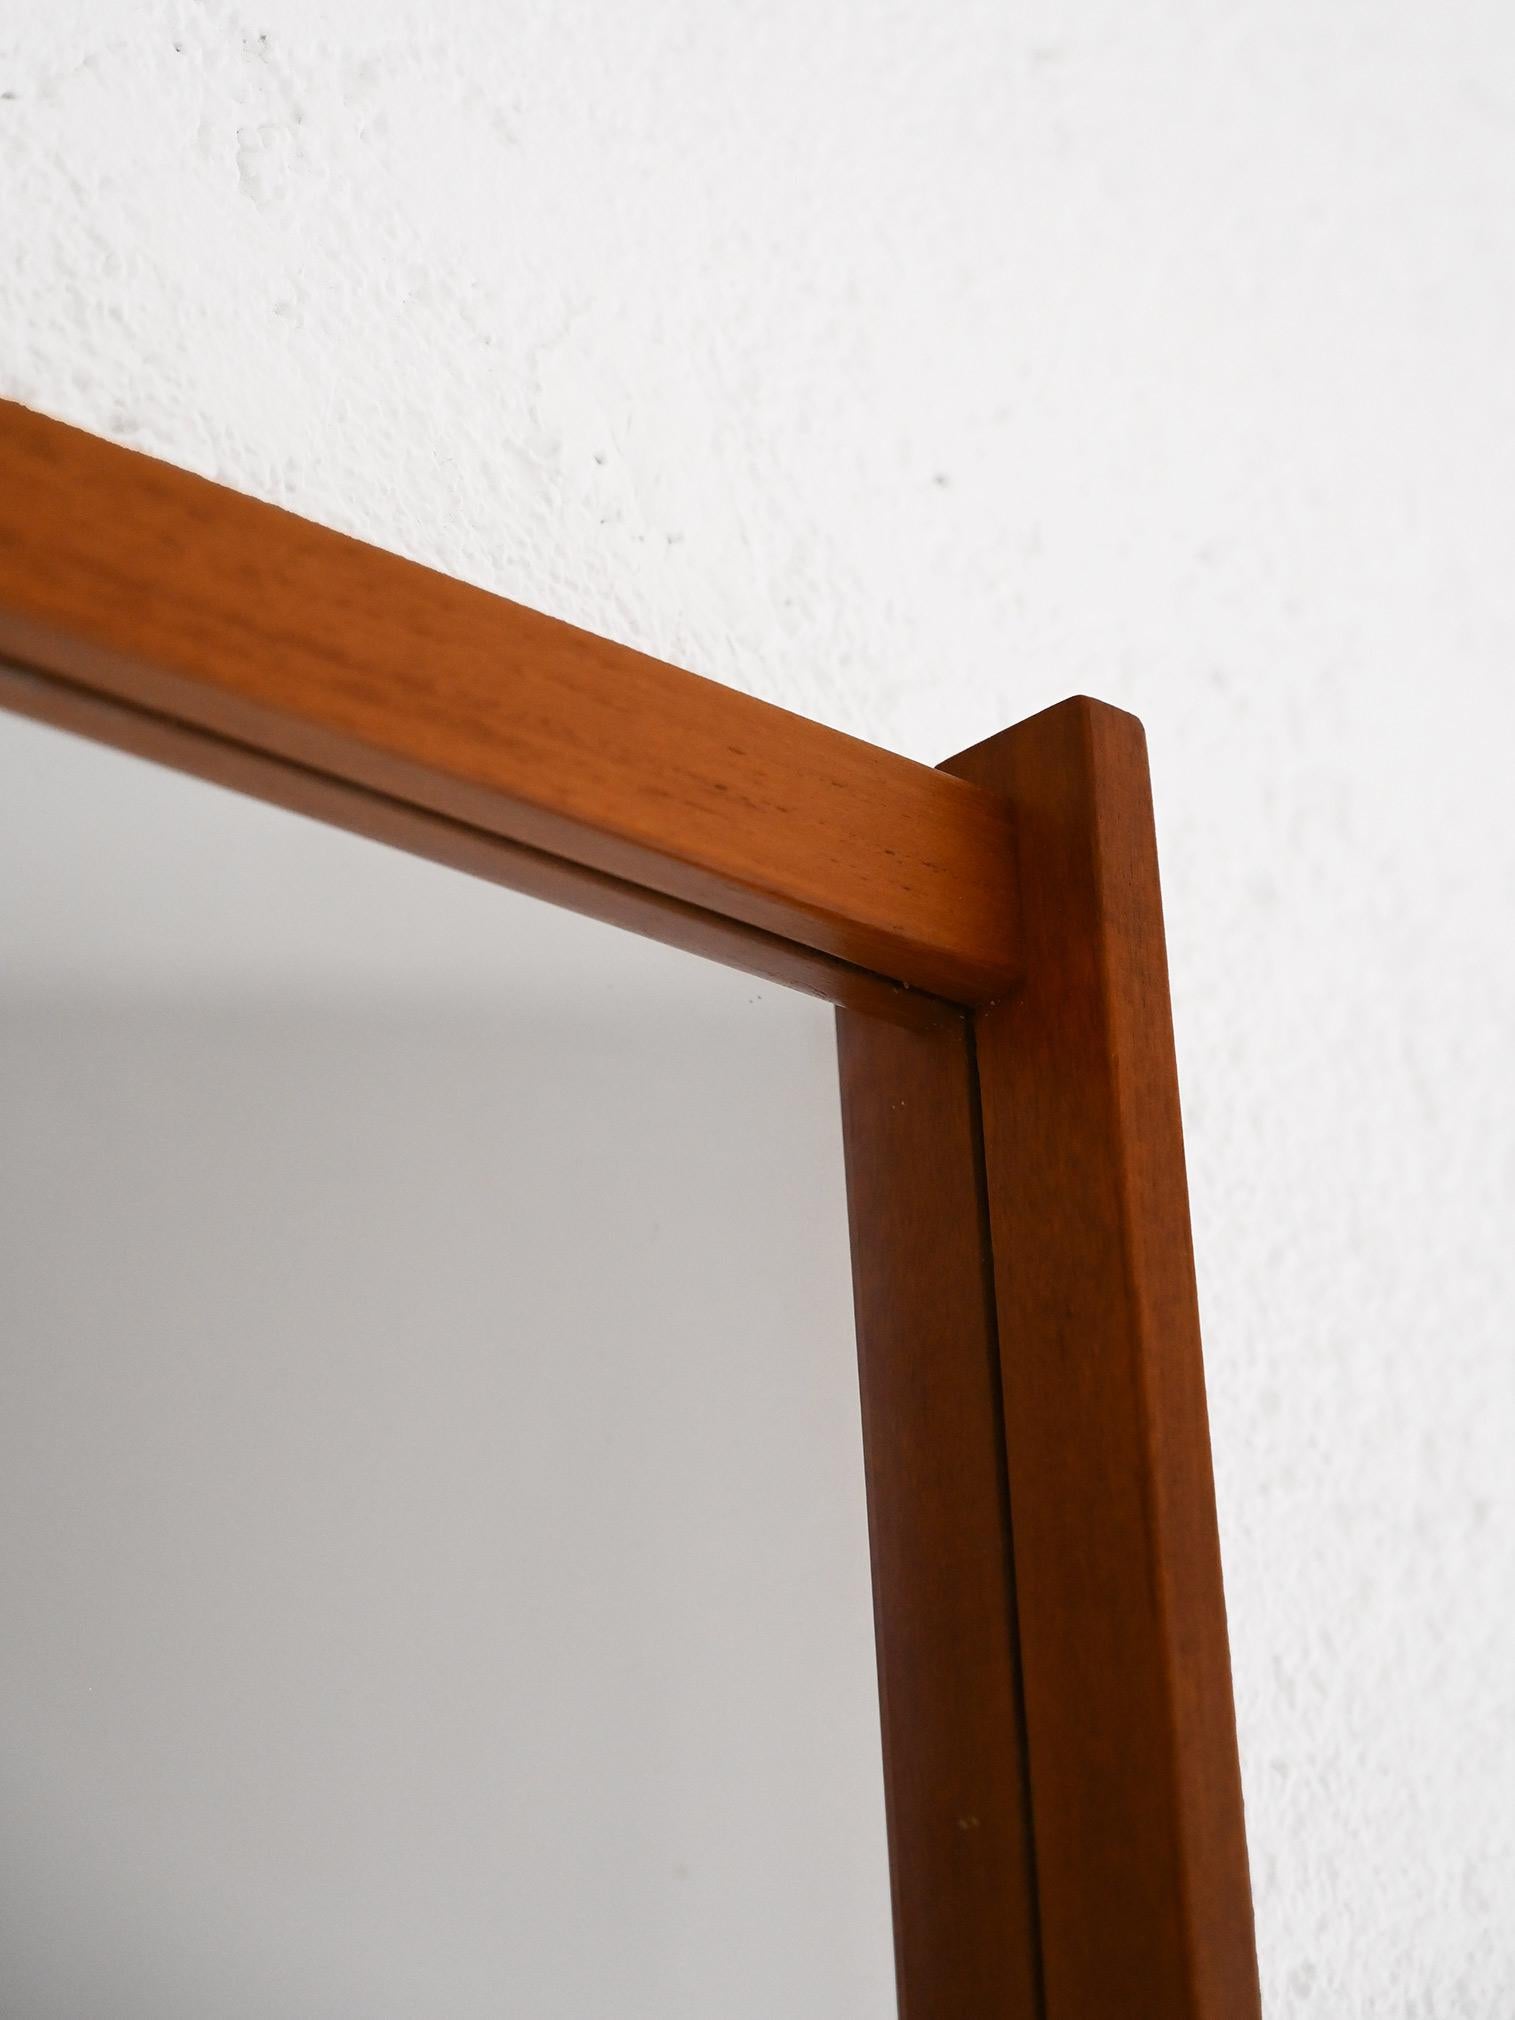 Scandinavian vintage modernism mirror.

A simple and elegant piece of furniture consisting of a rectangular teak wood frame. The long sides of the frame are protruding from the short ones, giving it an original look.
This half-figure mirror can be